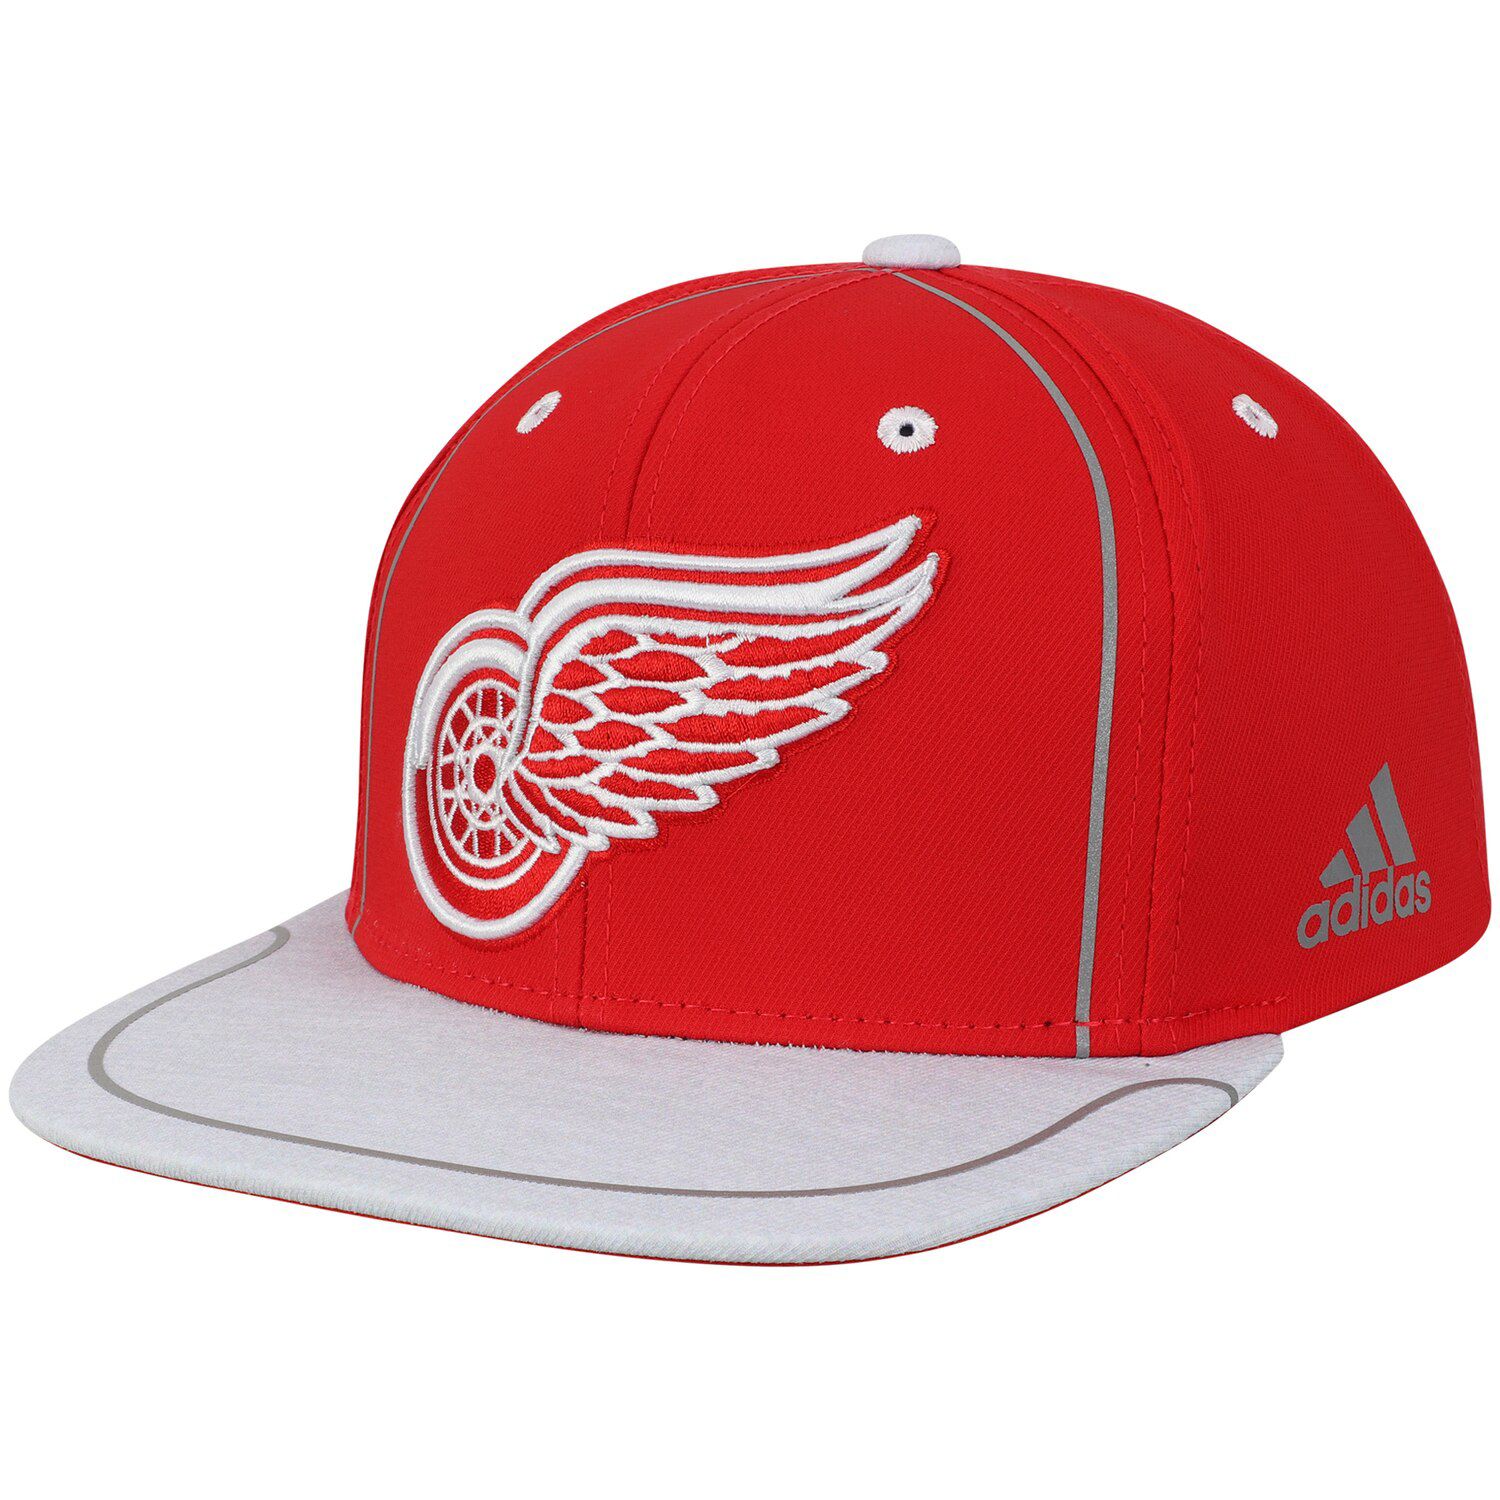 adidas red wings hat